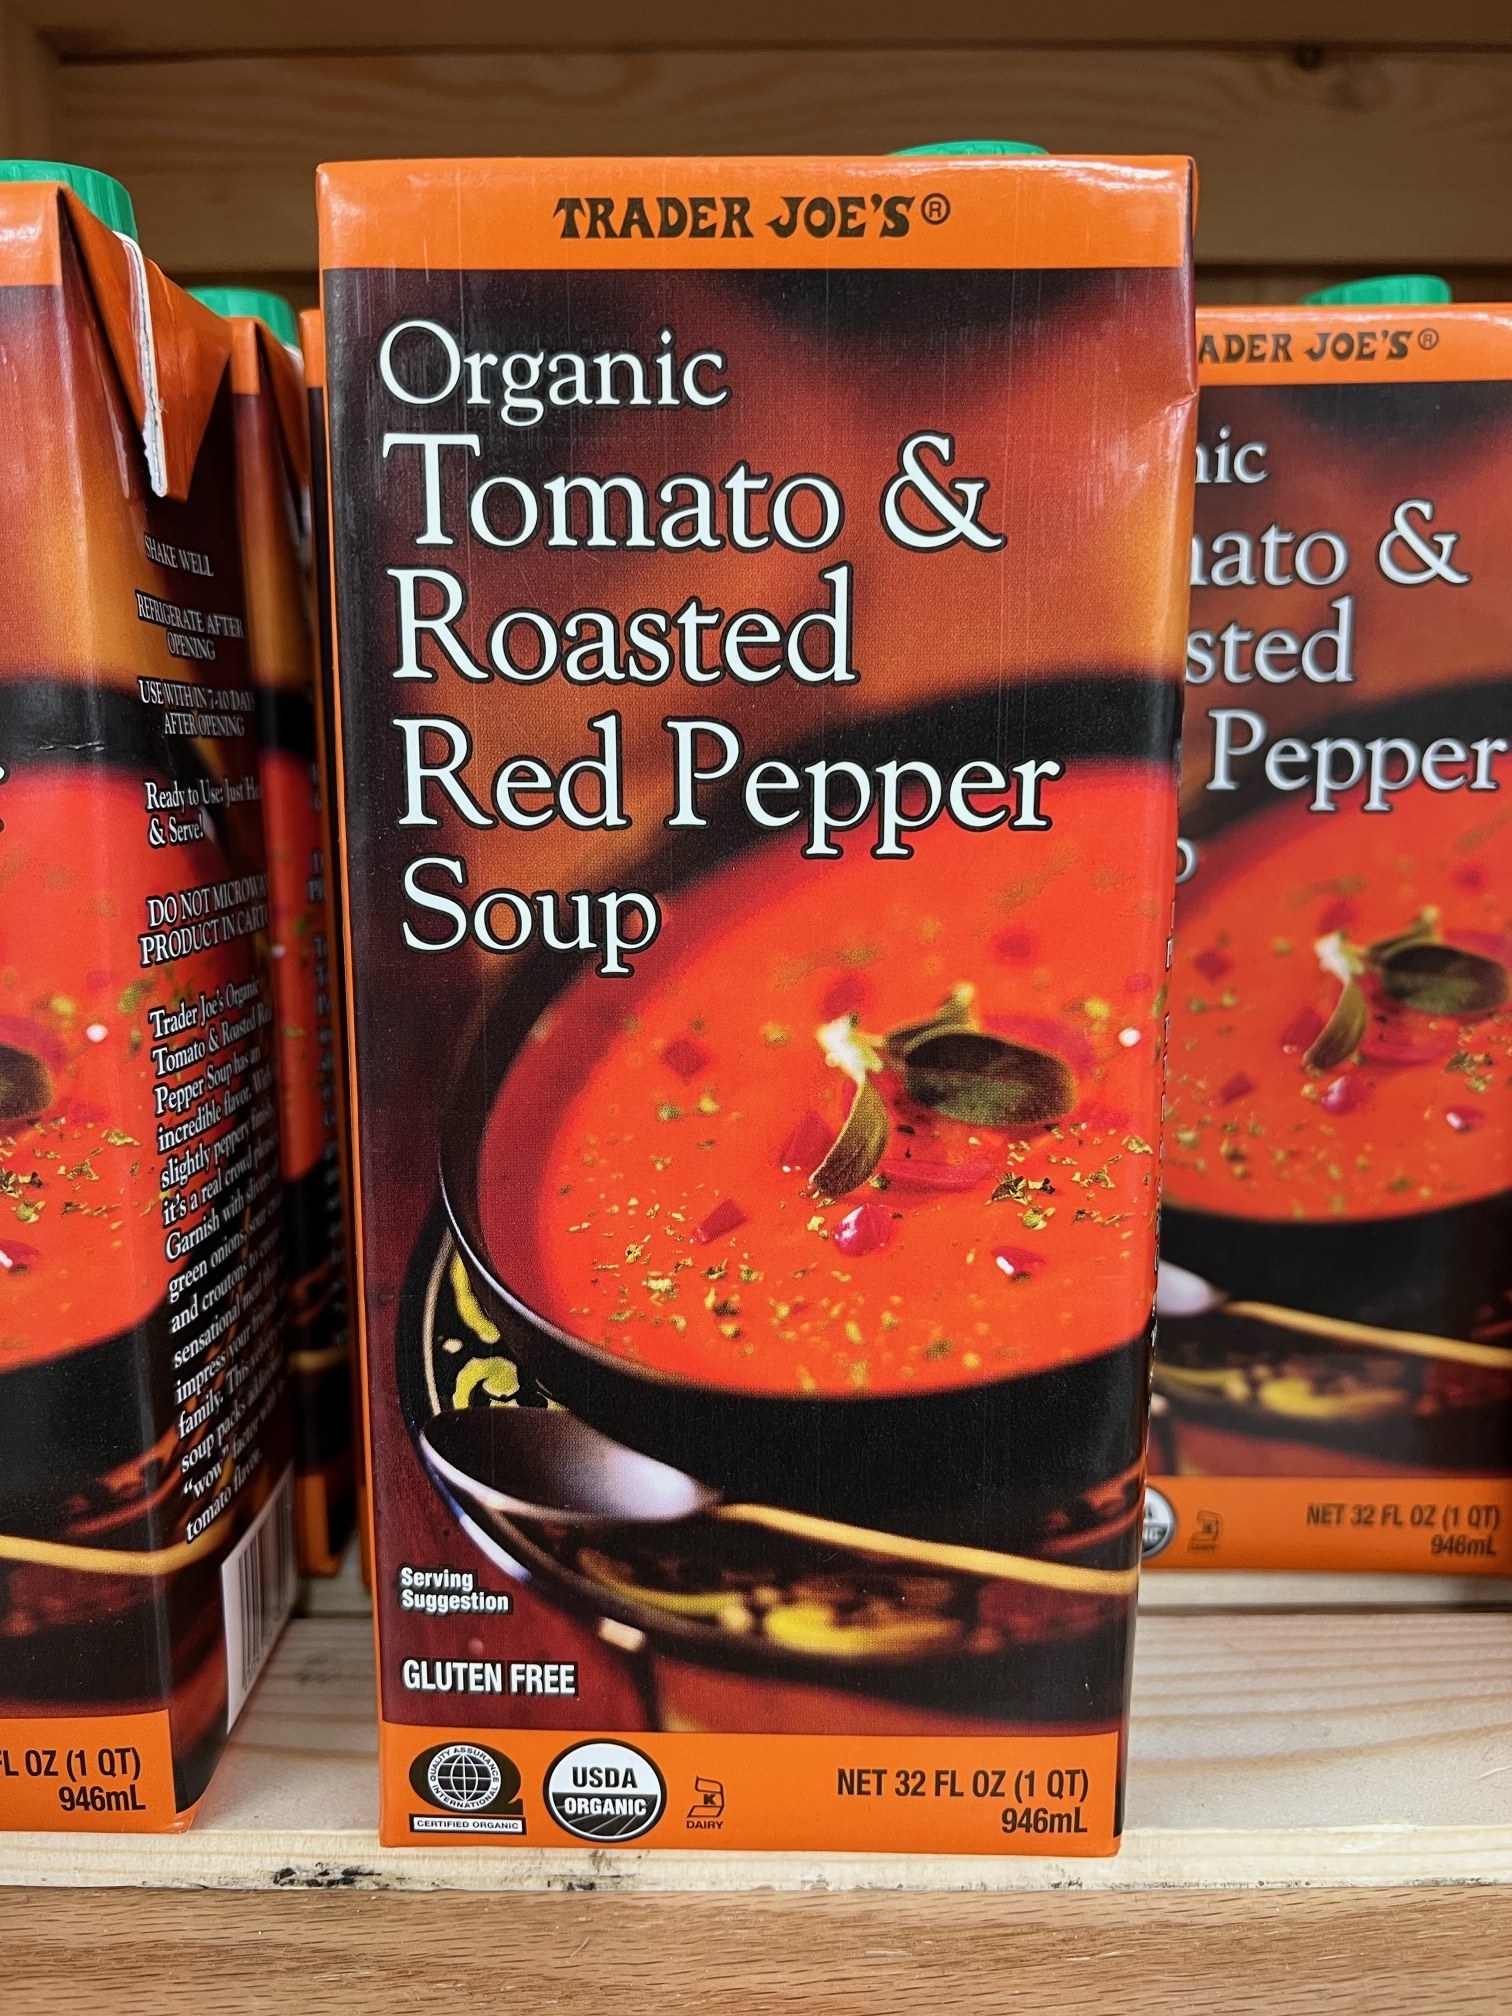 Cartons of tomato and roasted red pepper soup.